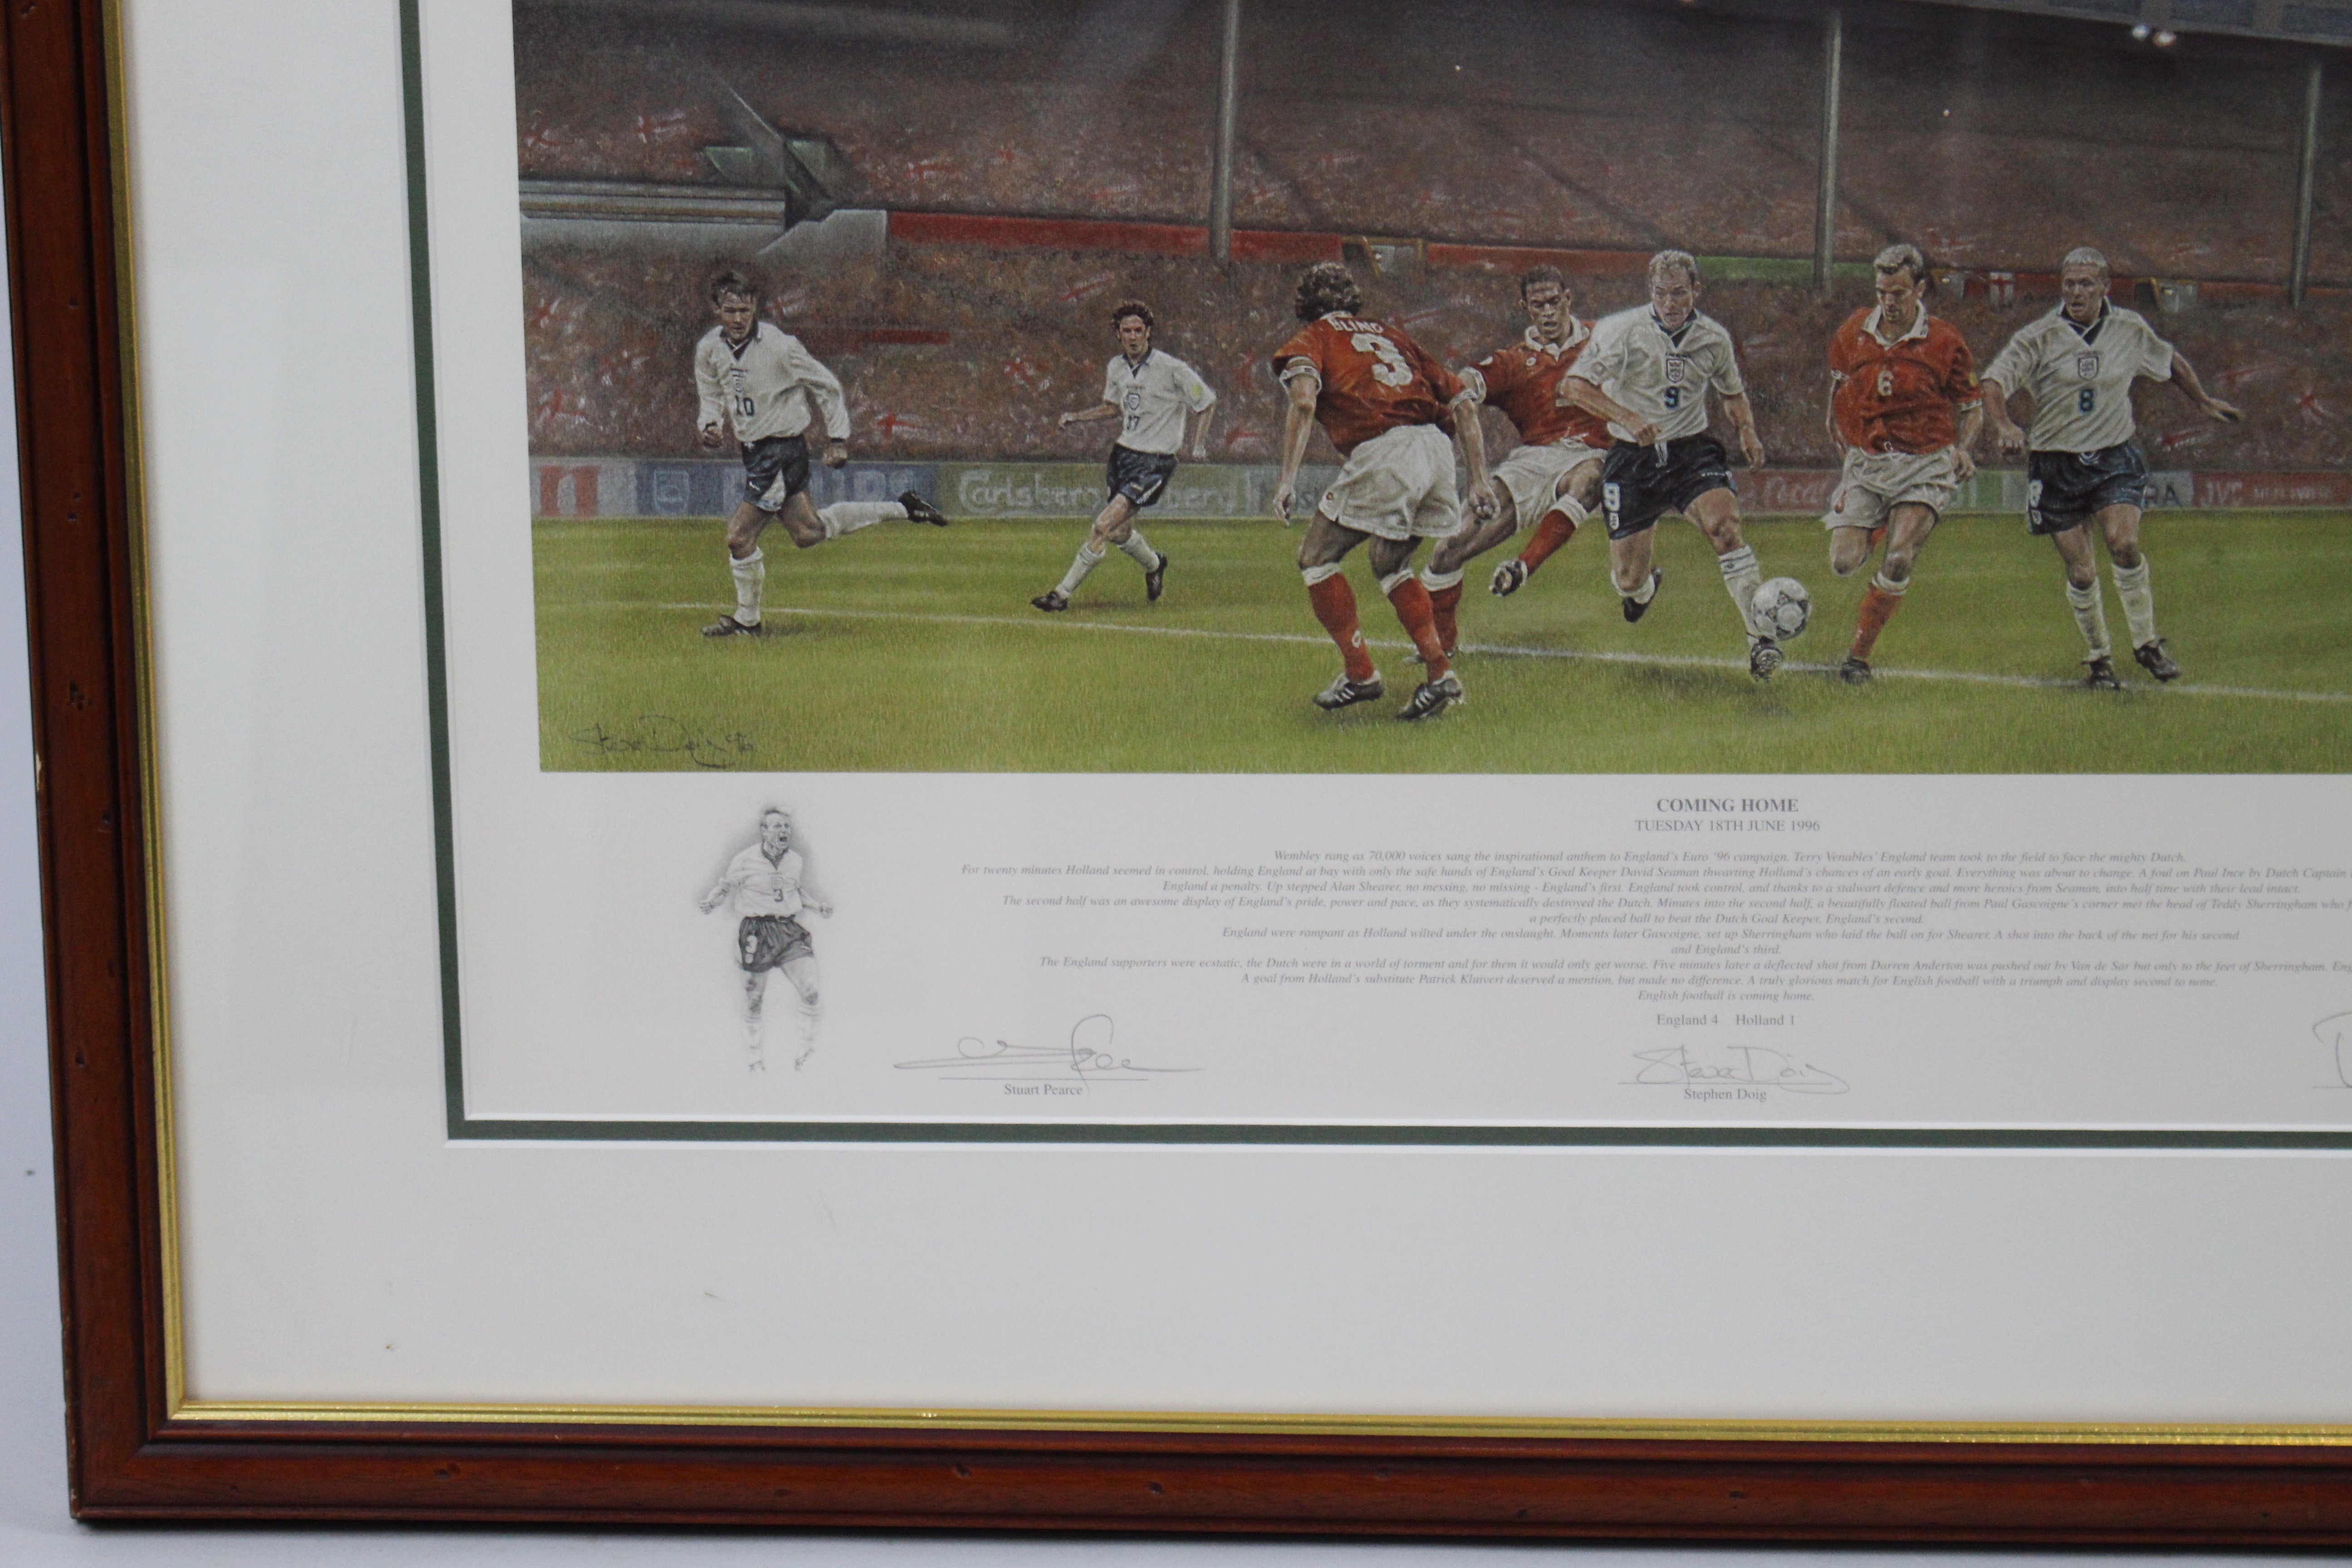 Signed Limited Edition Framed Football Print "Coming Home" - Image 4 of 5